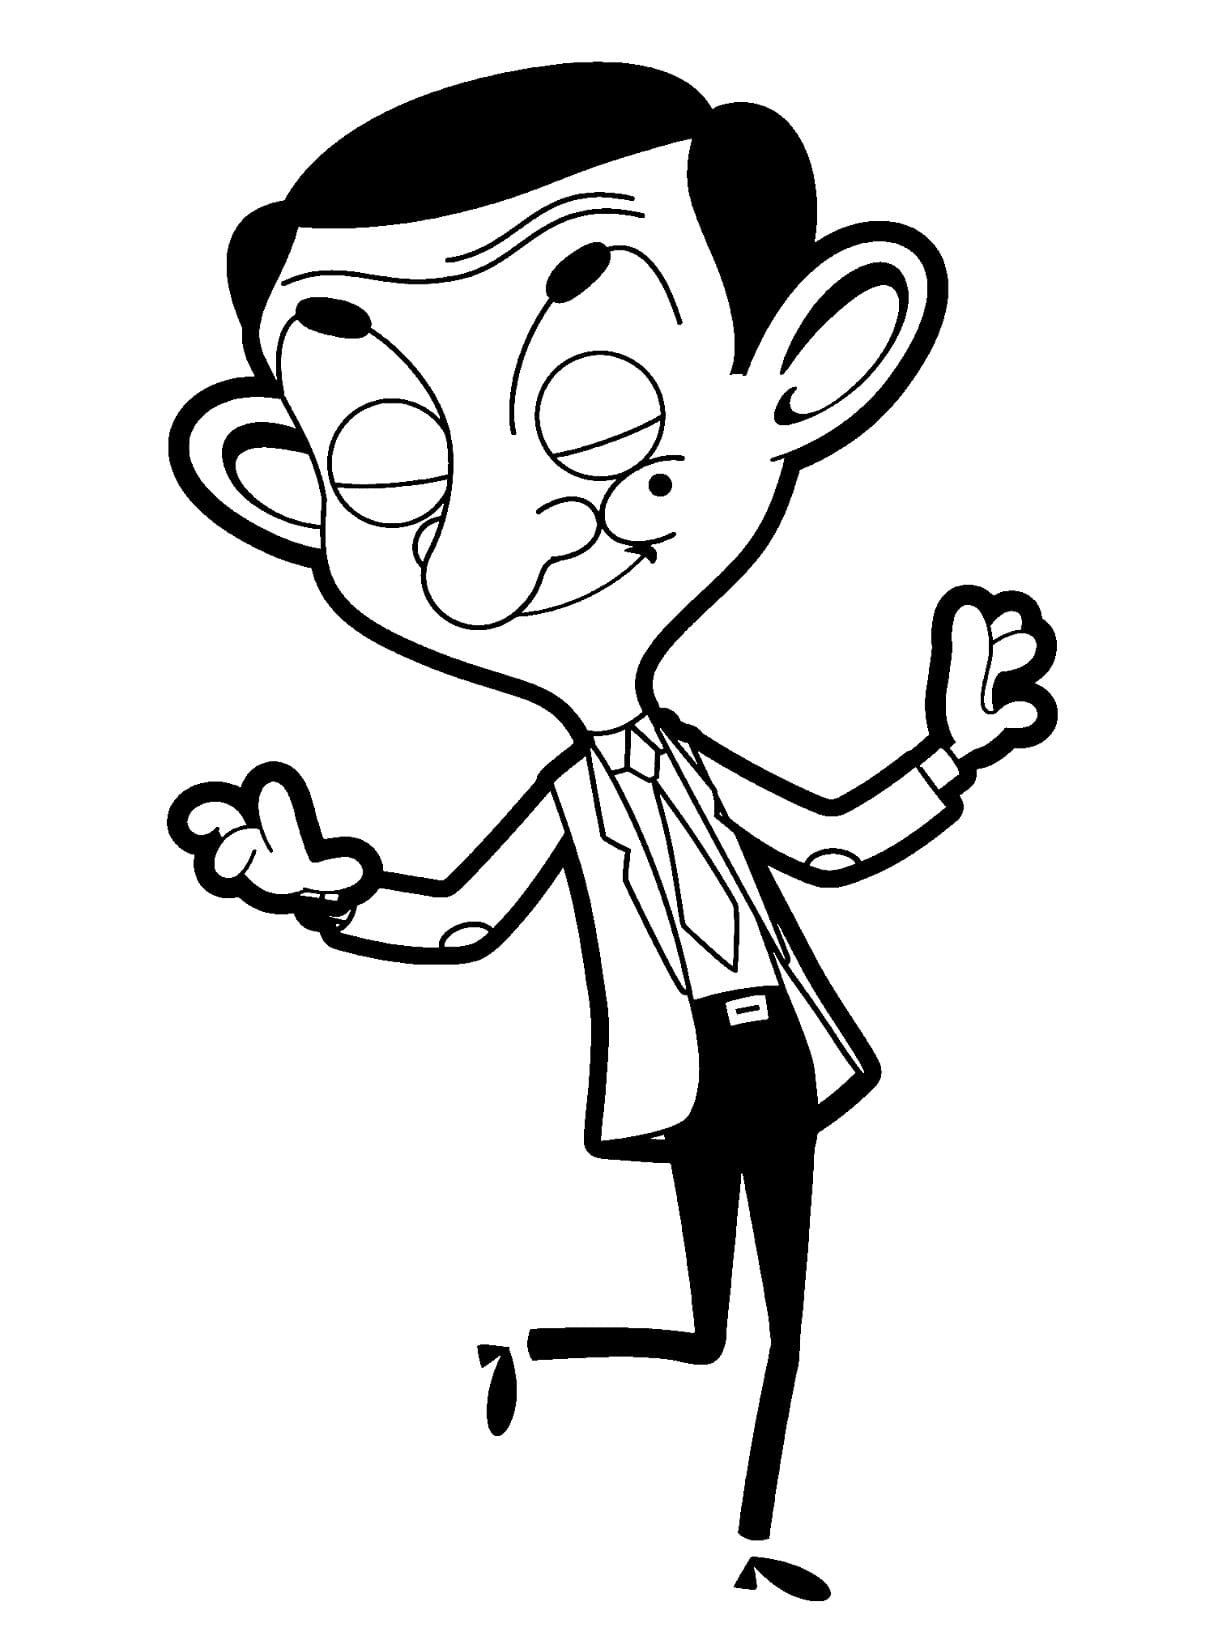 Mr Bean is Dancing coloring page - Download, Print or Color Online for Free